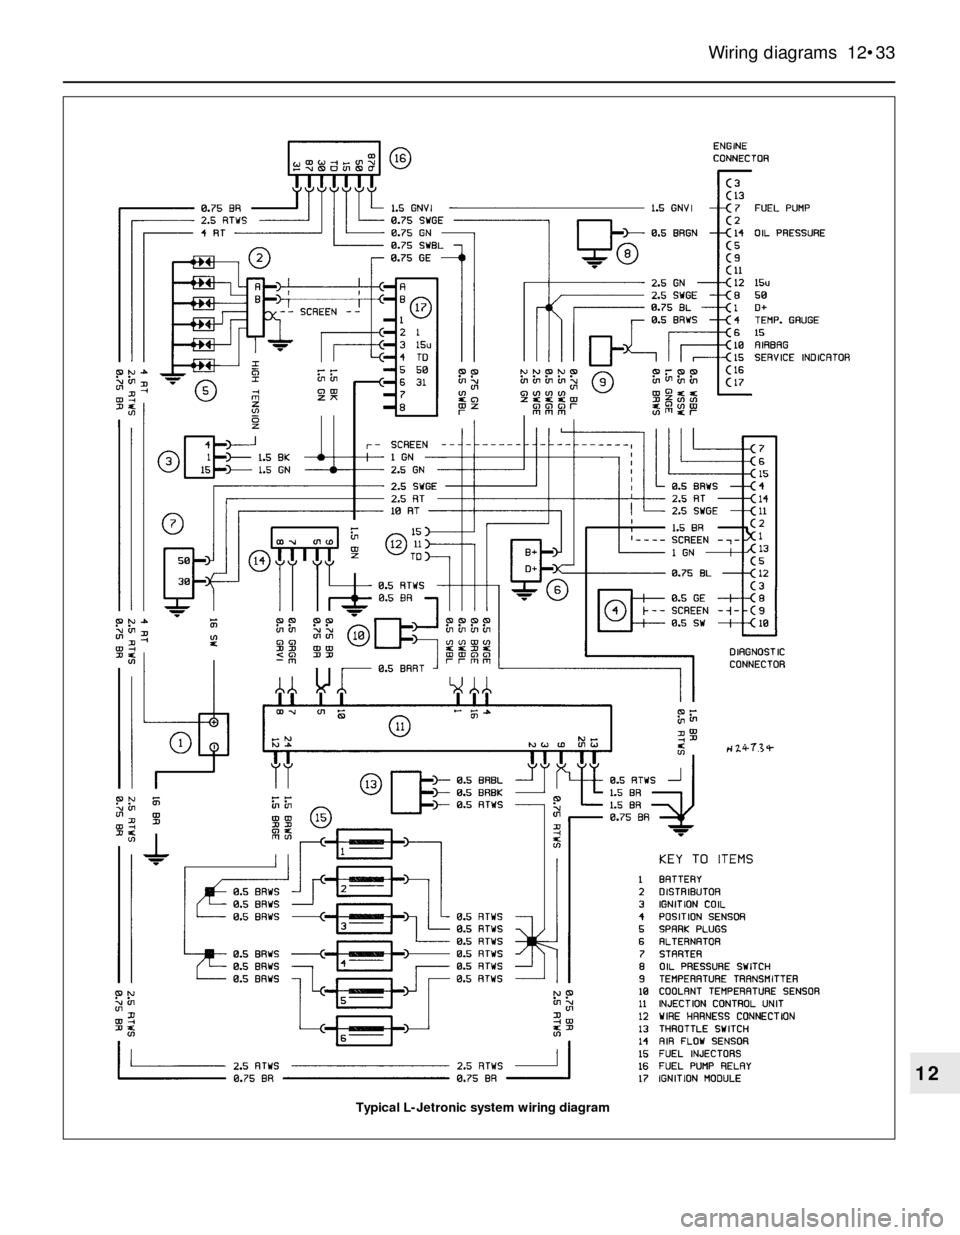 BMW 3 SERIES 1986 E30 Owners Manual Wiring diagrams  12•33
12
Typical L-Jetronic system wiring diagram 